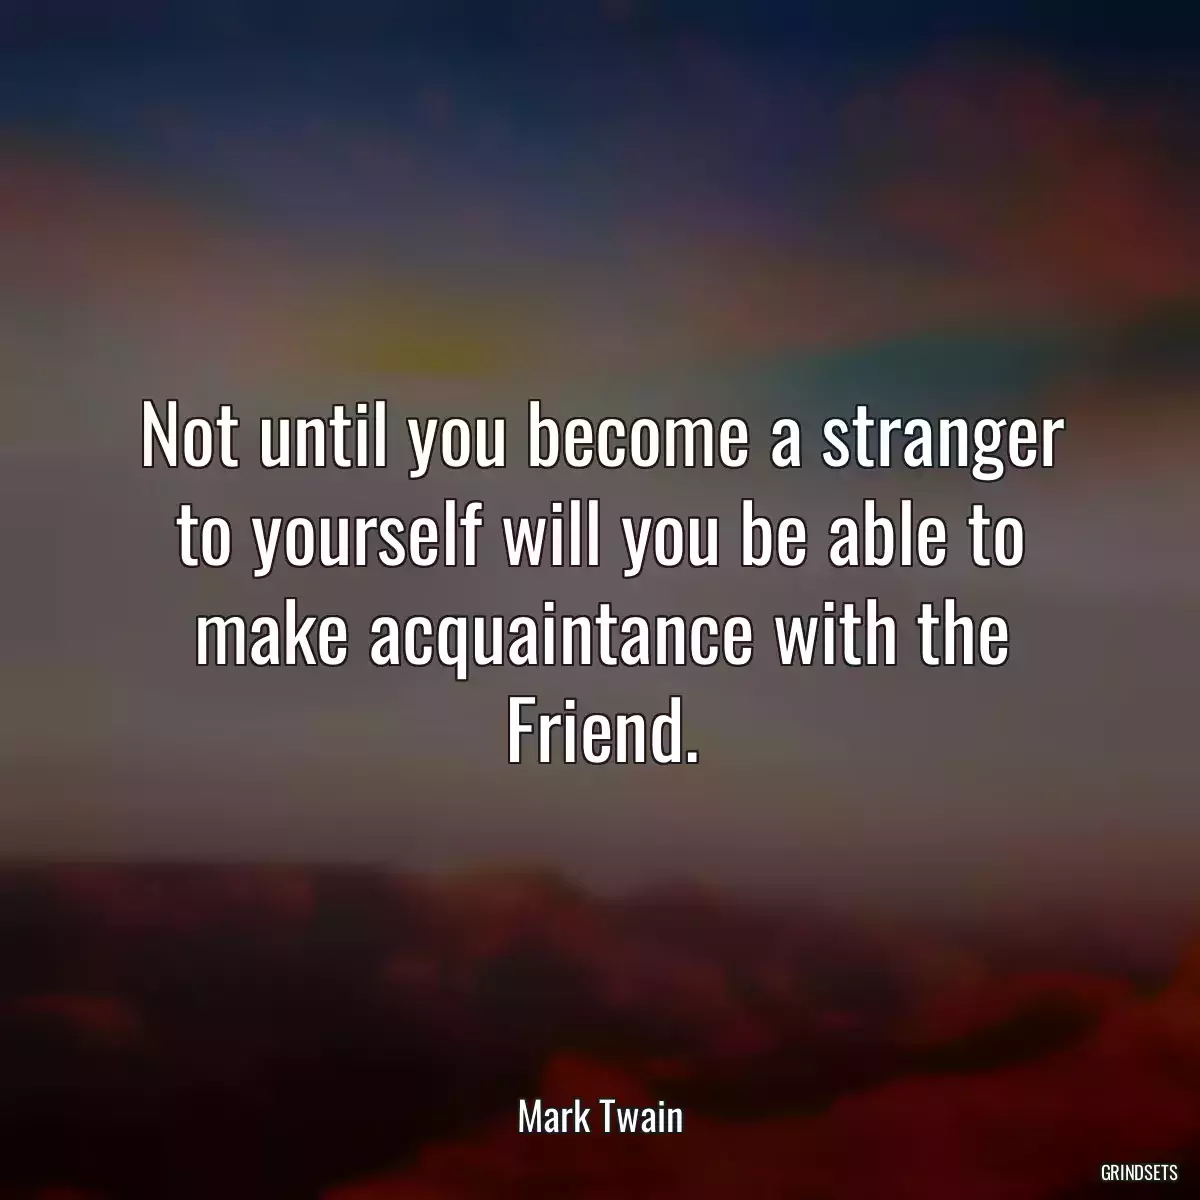 Not until you become a stranger to yourself will you be able to make acquaintance with the Friend.